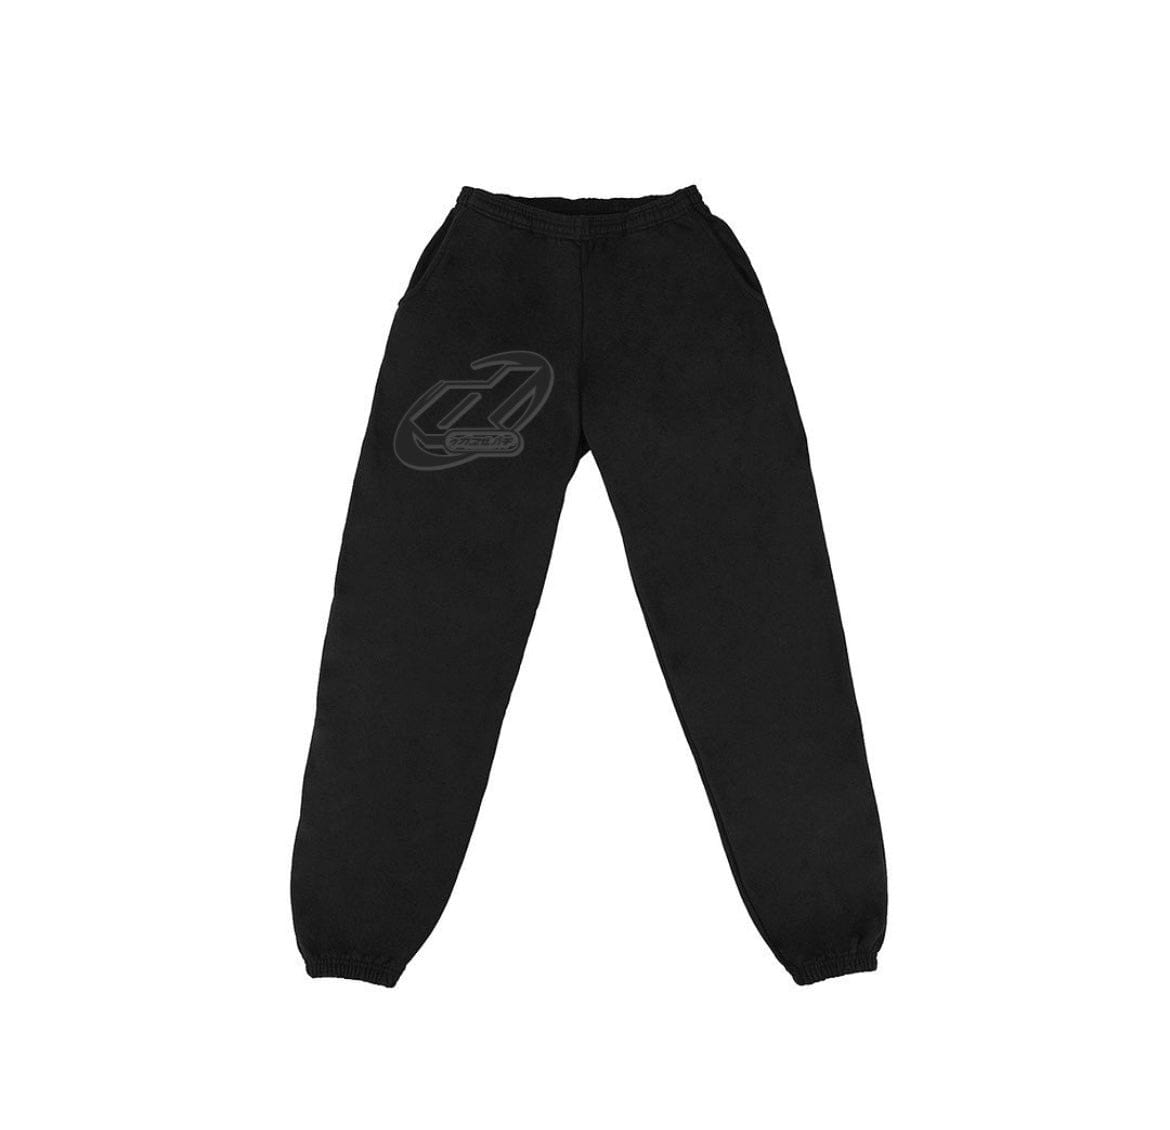 "The Lost World" Joggers